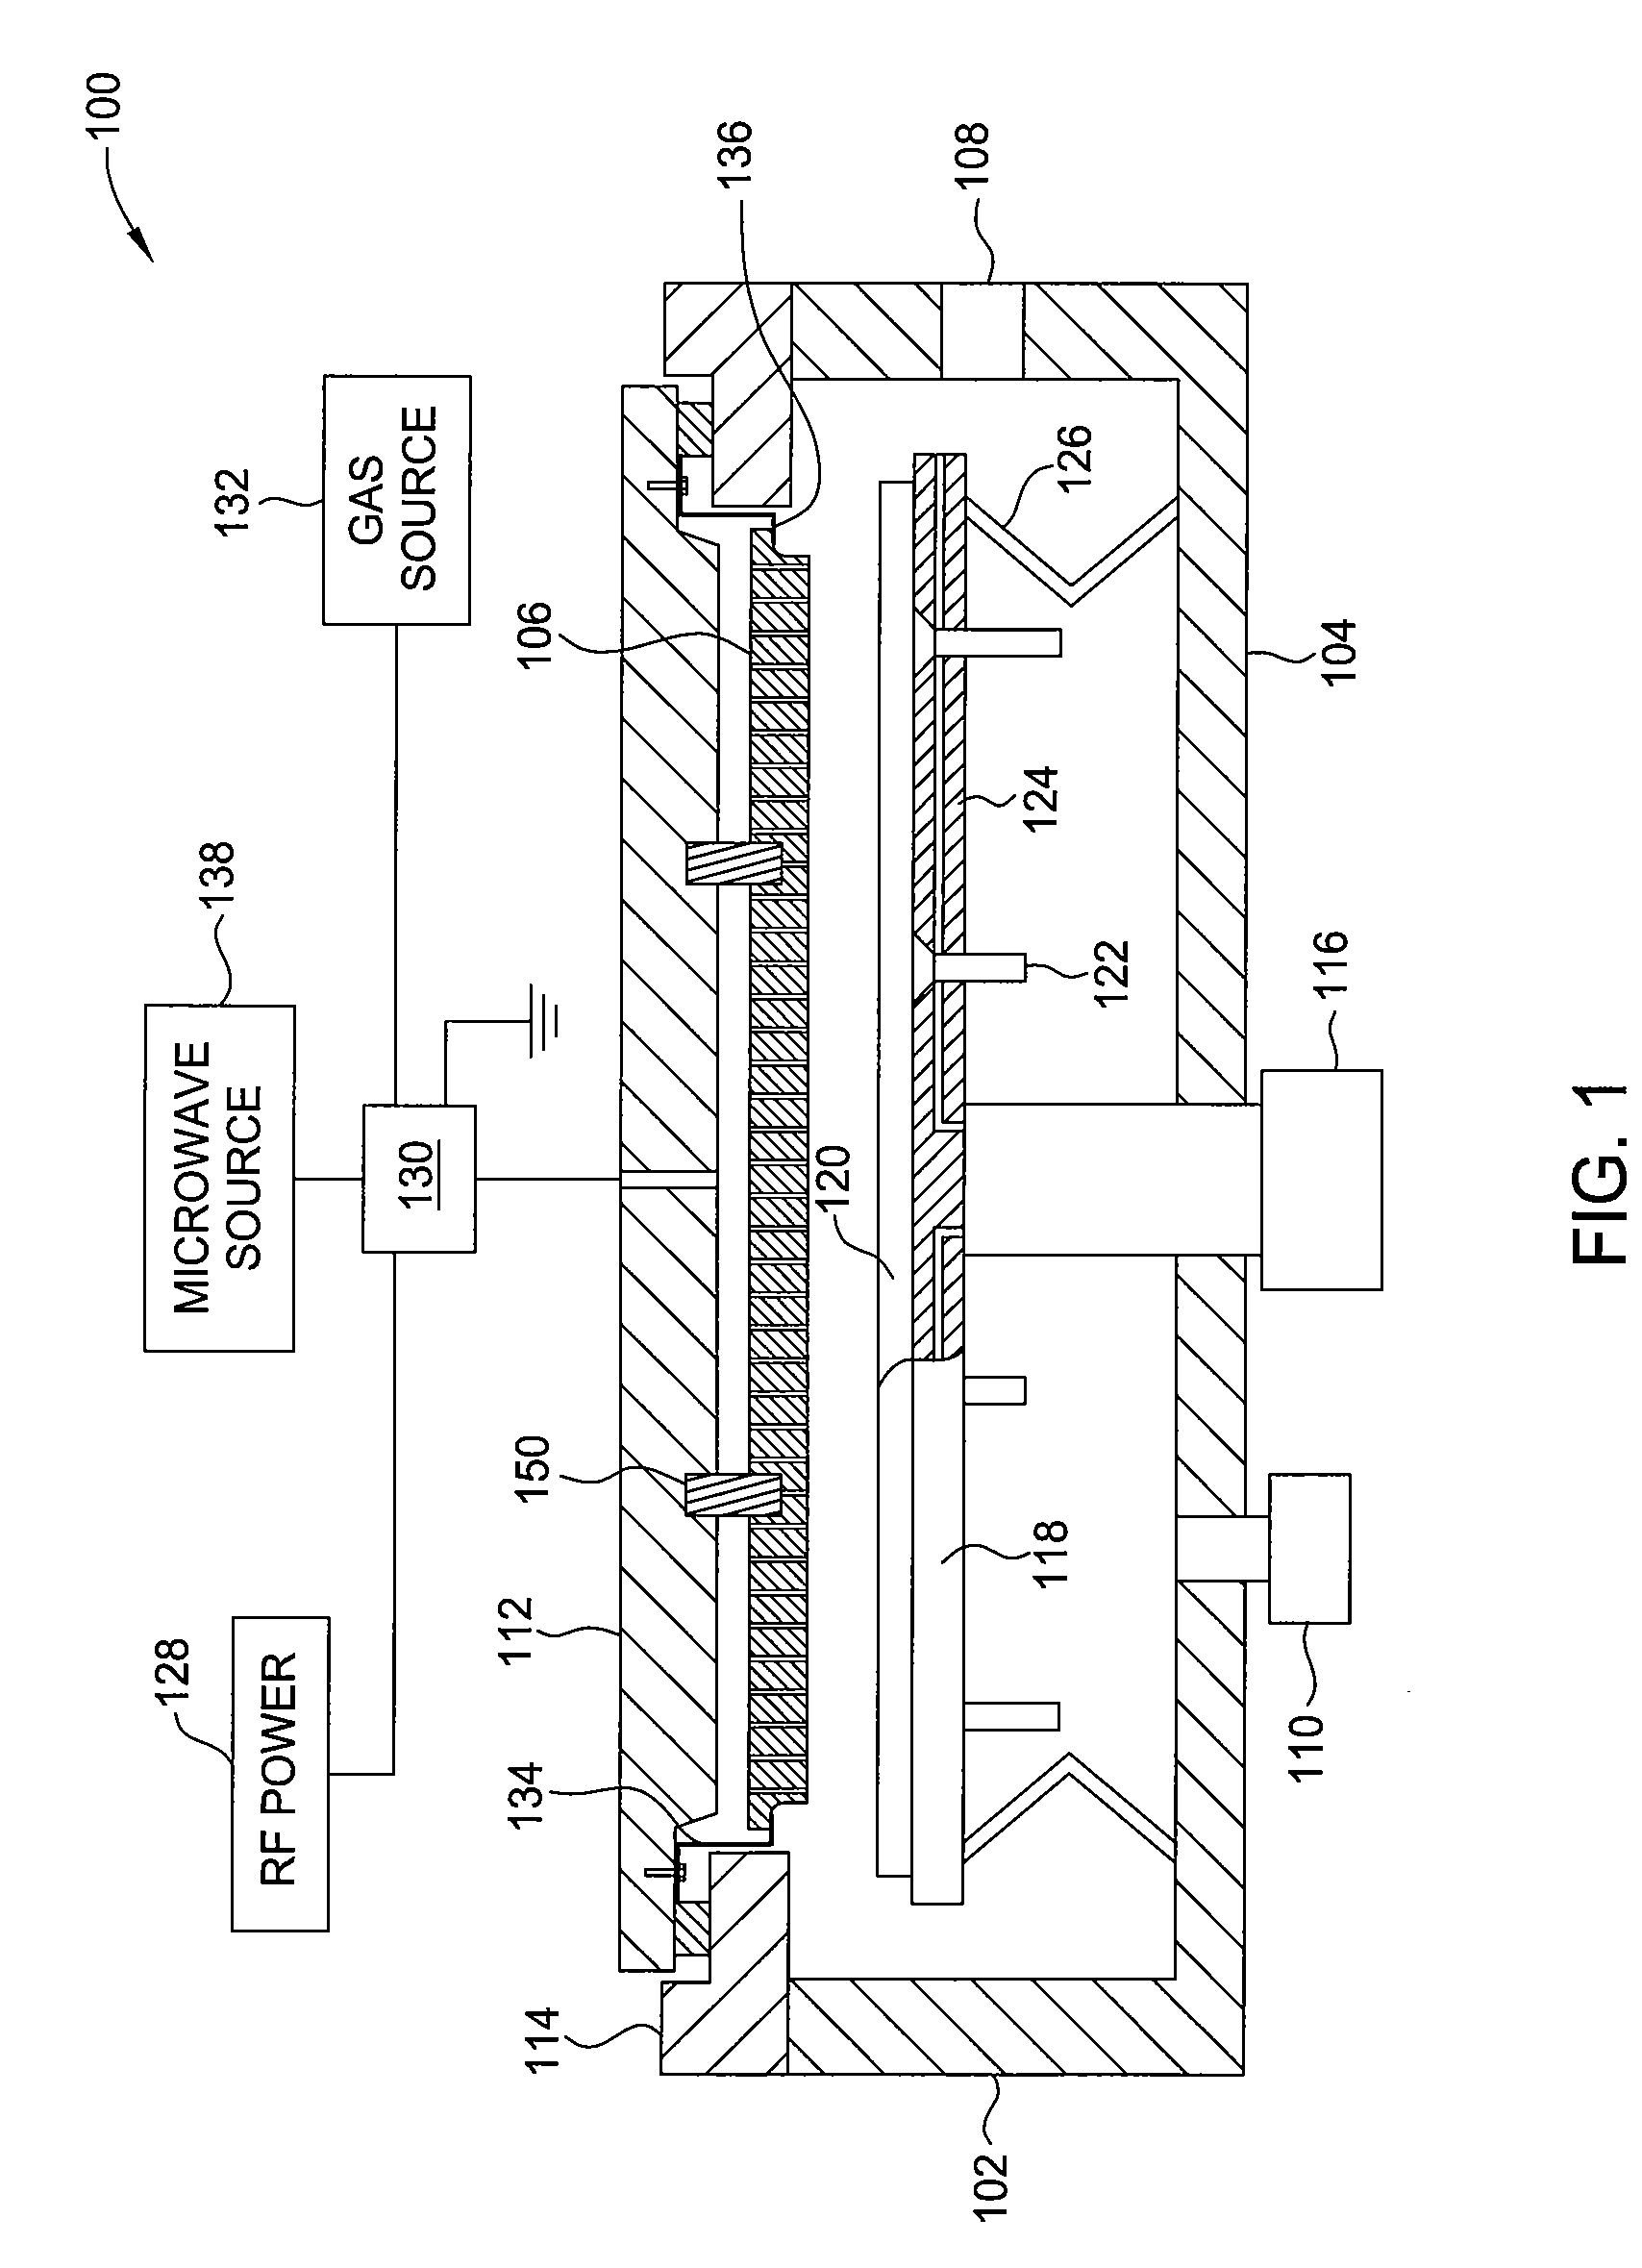 Low temperature thin film transistor process, device property, and device stability improvement